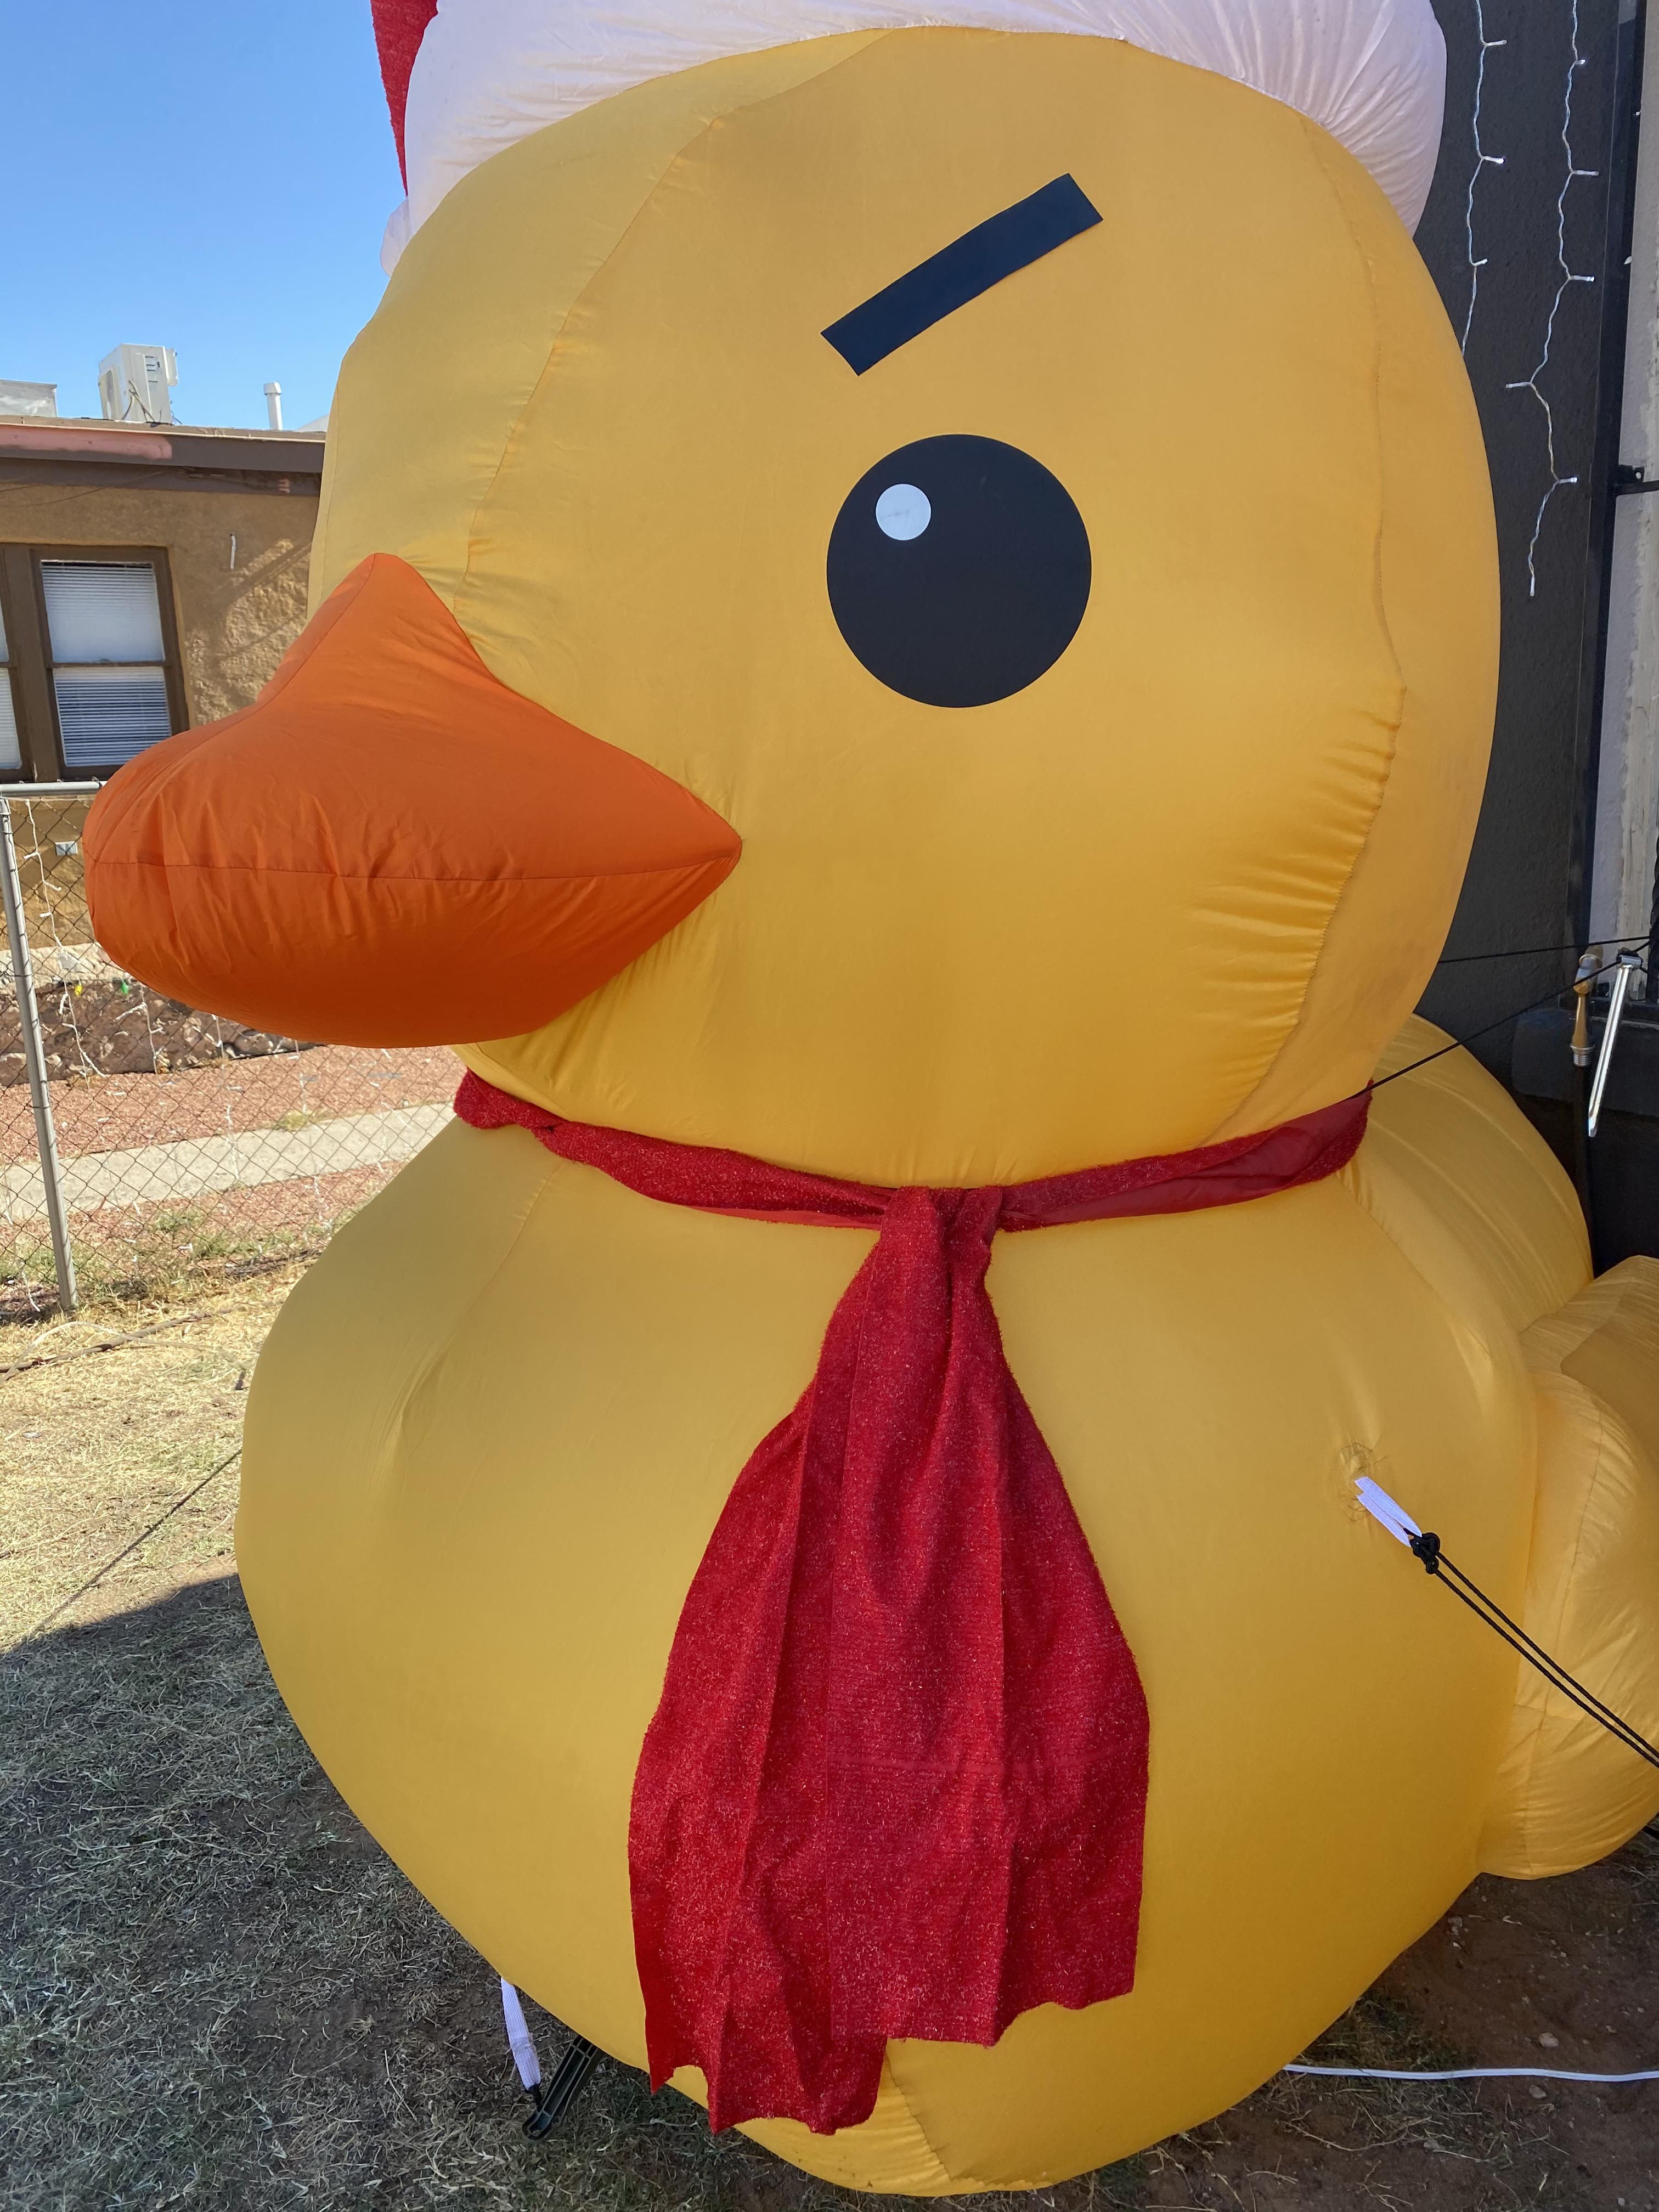 Added some black tape eyebrows to our Xmas duck.